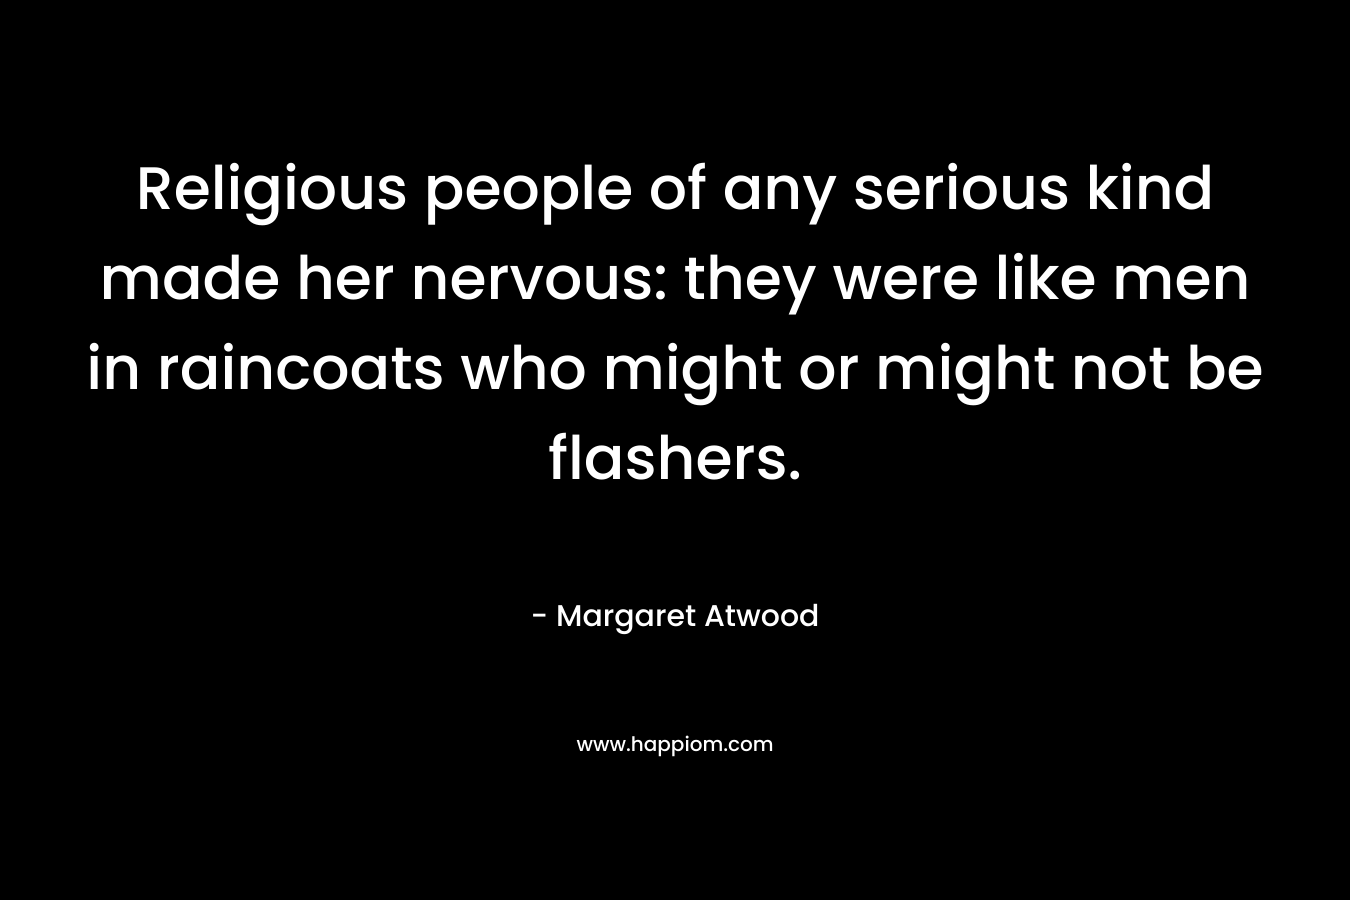 Religious people of any serious kind made her nervous: they were like men in raincoats who might or might not be flashers.